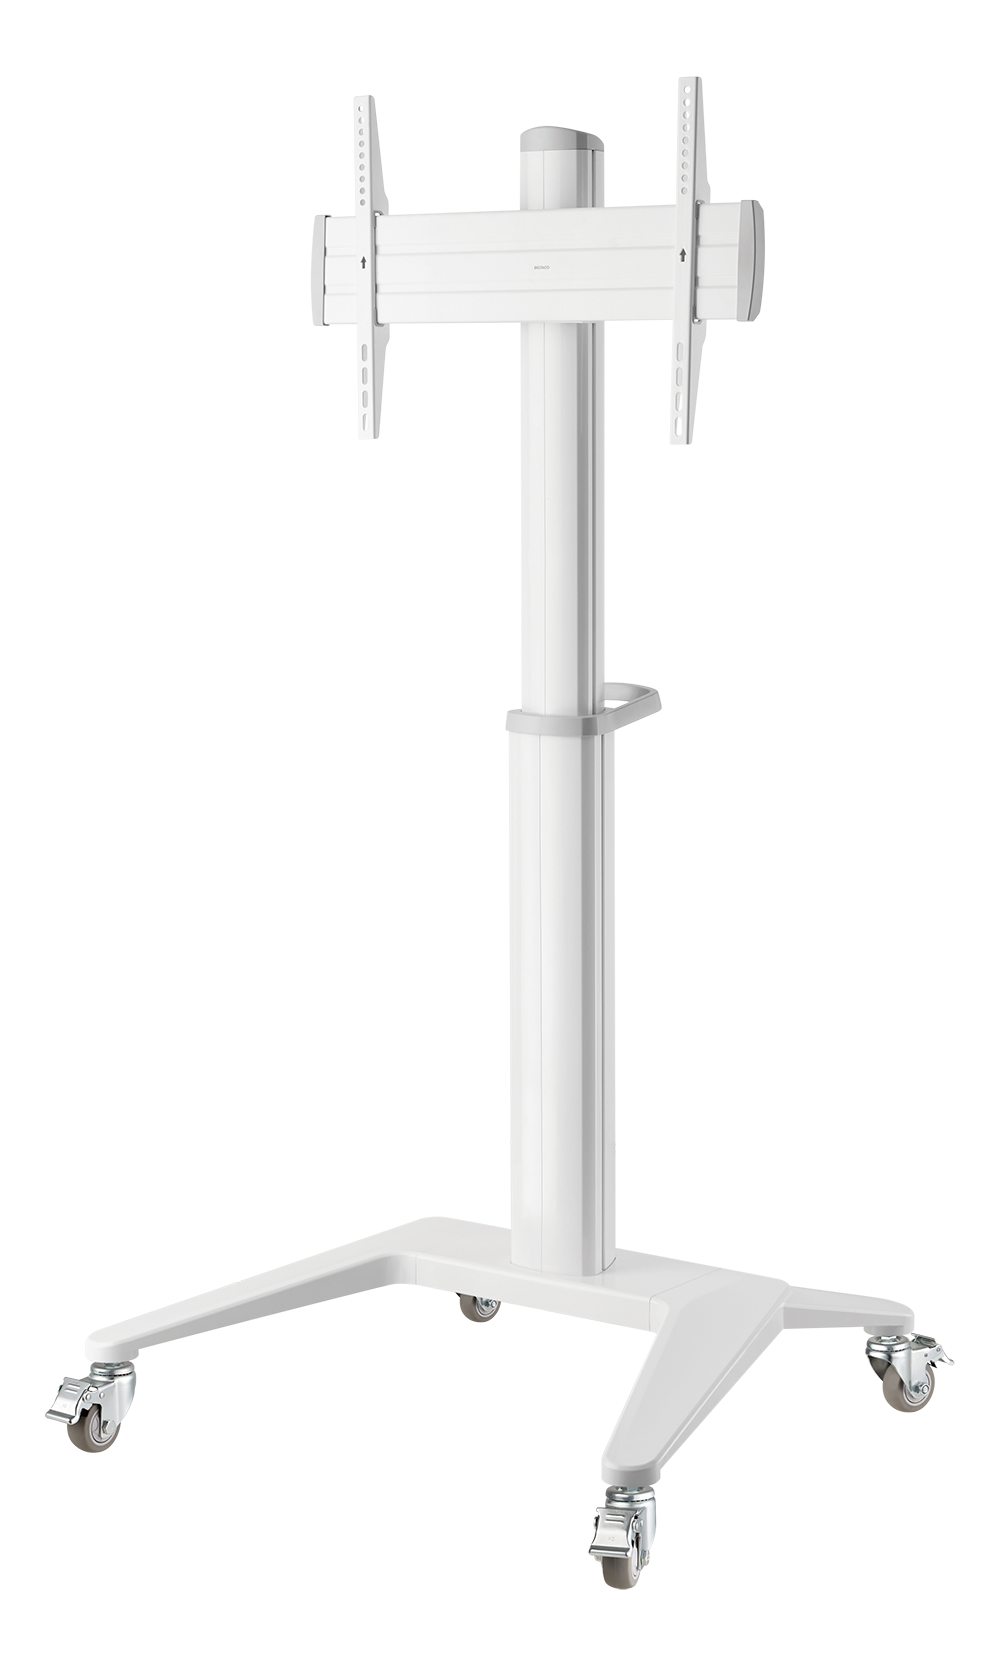 Display Cart DELTACO OFFICE adjustable height, aluminum, 37-70", white / ARM-0452